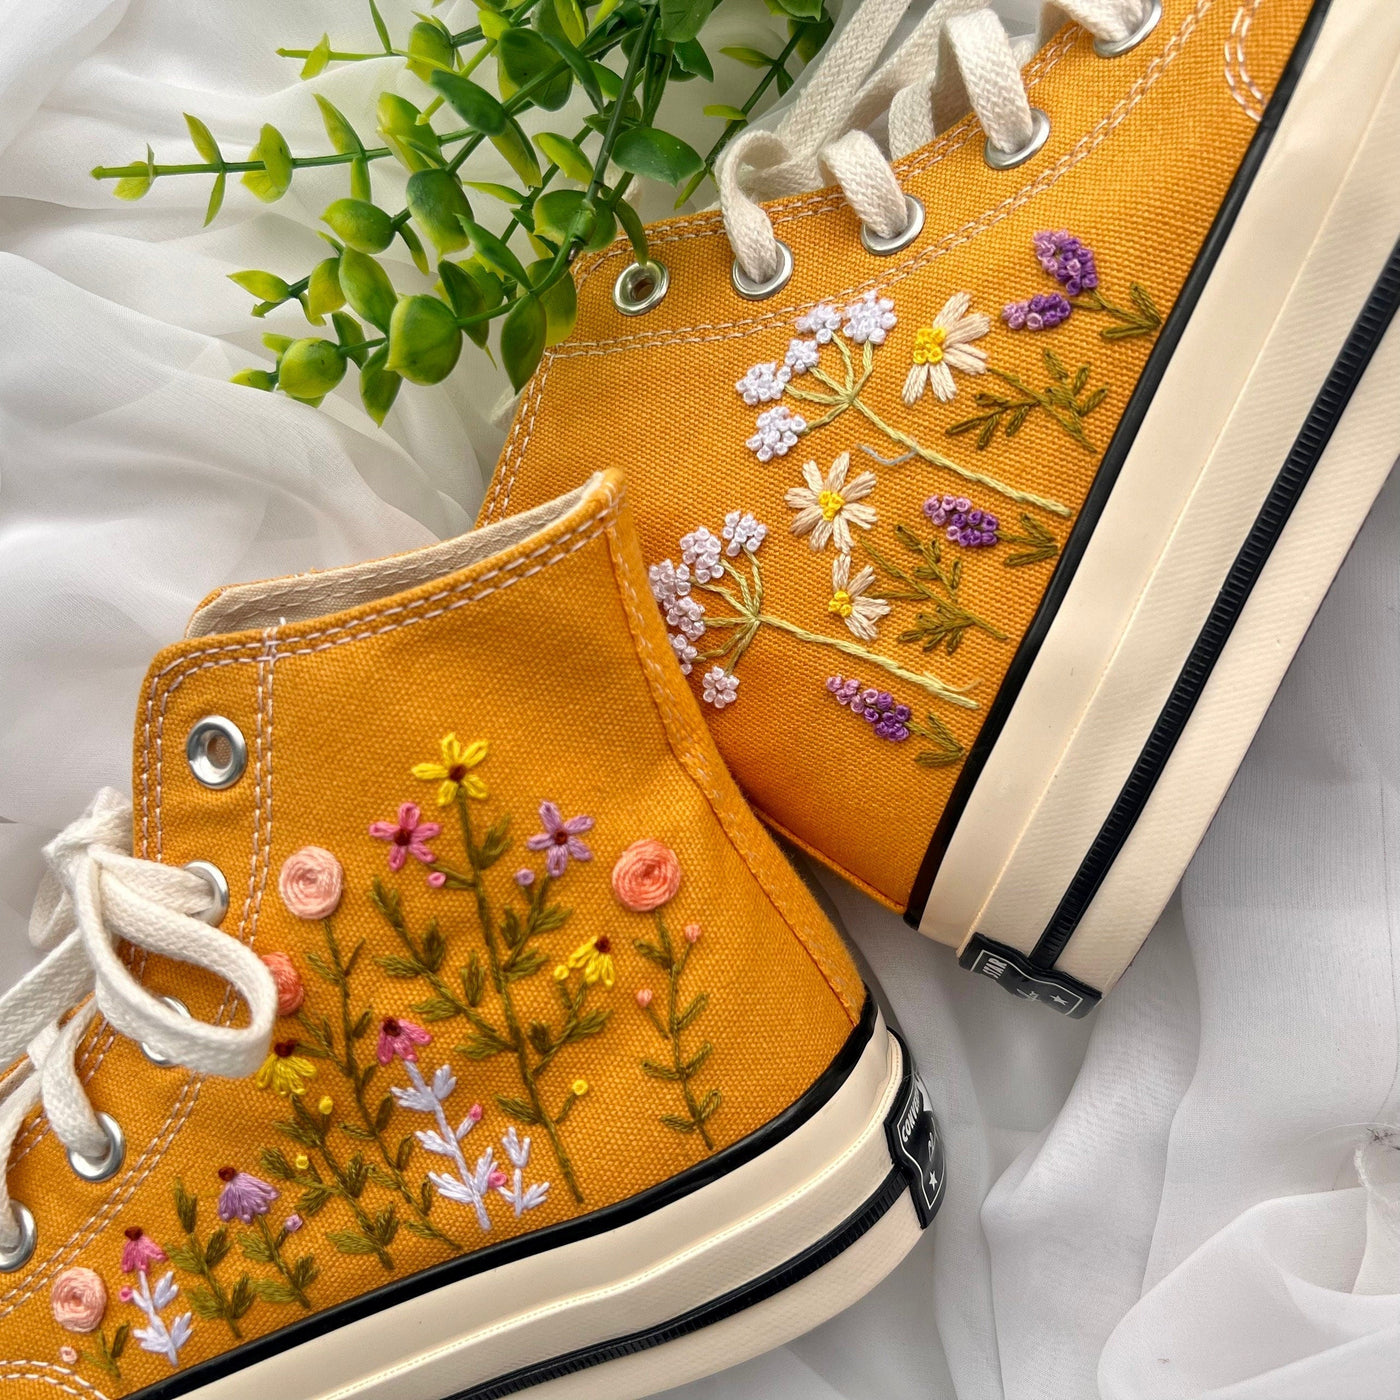 Embroidered Converse,Converse High Tops,Embroidered Sweet Rose Lavender